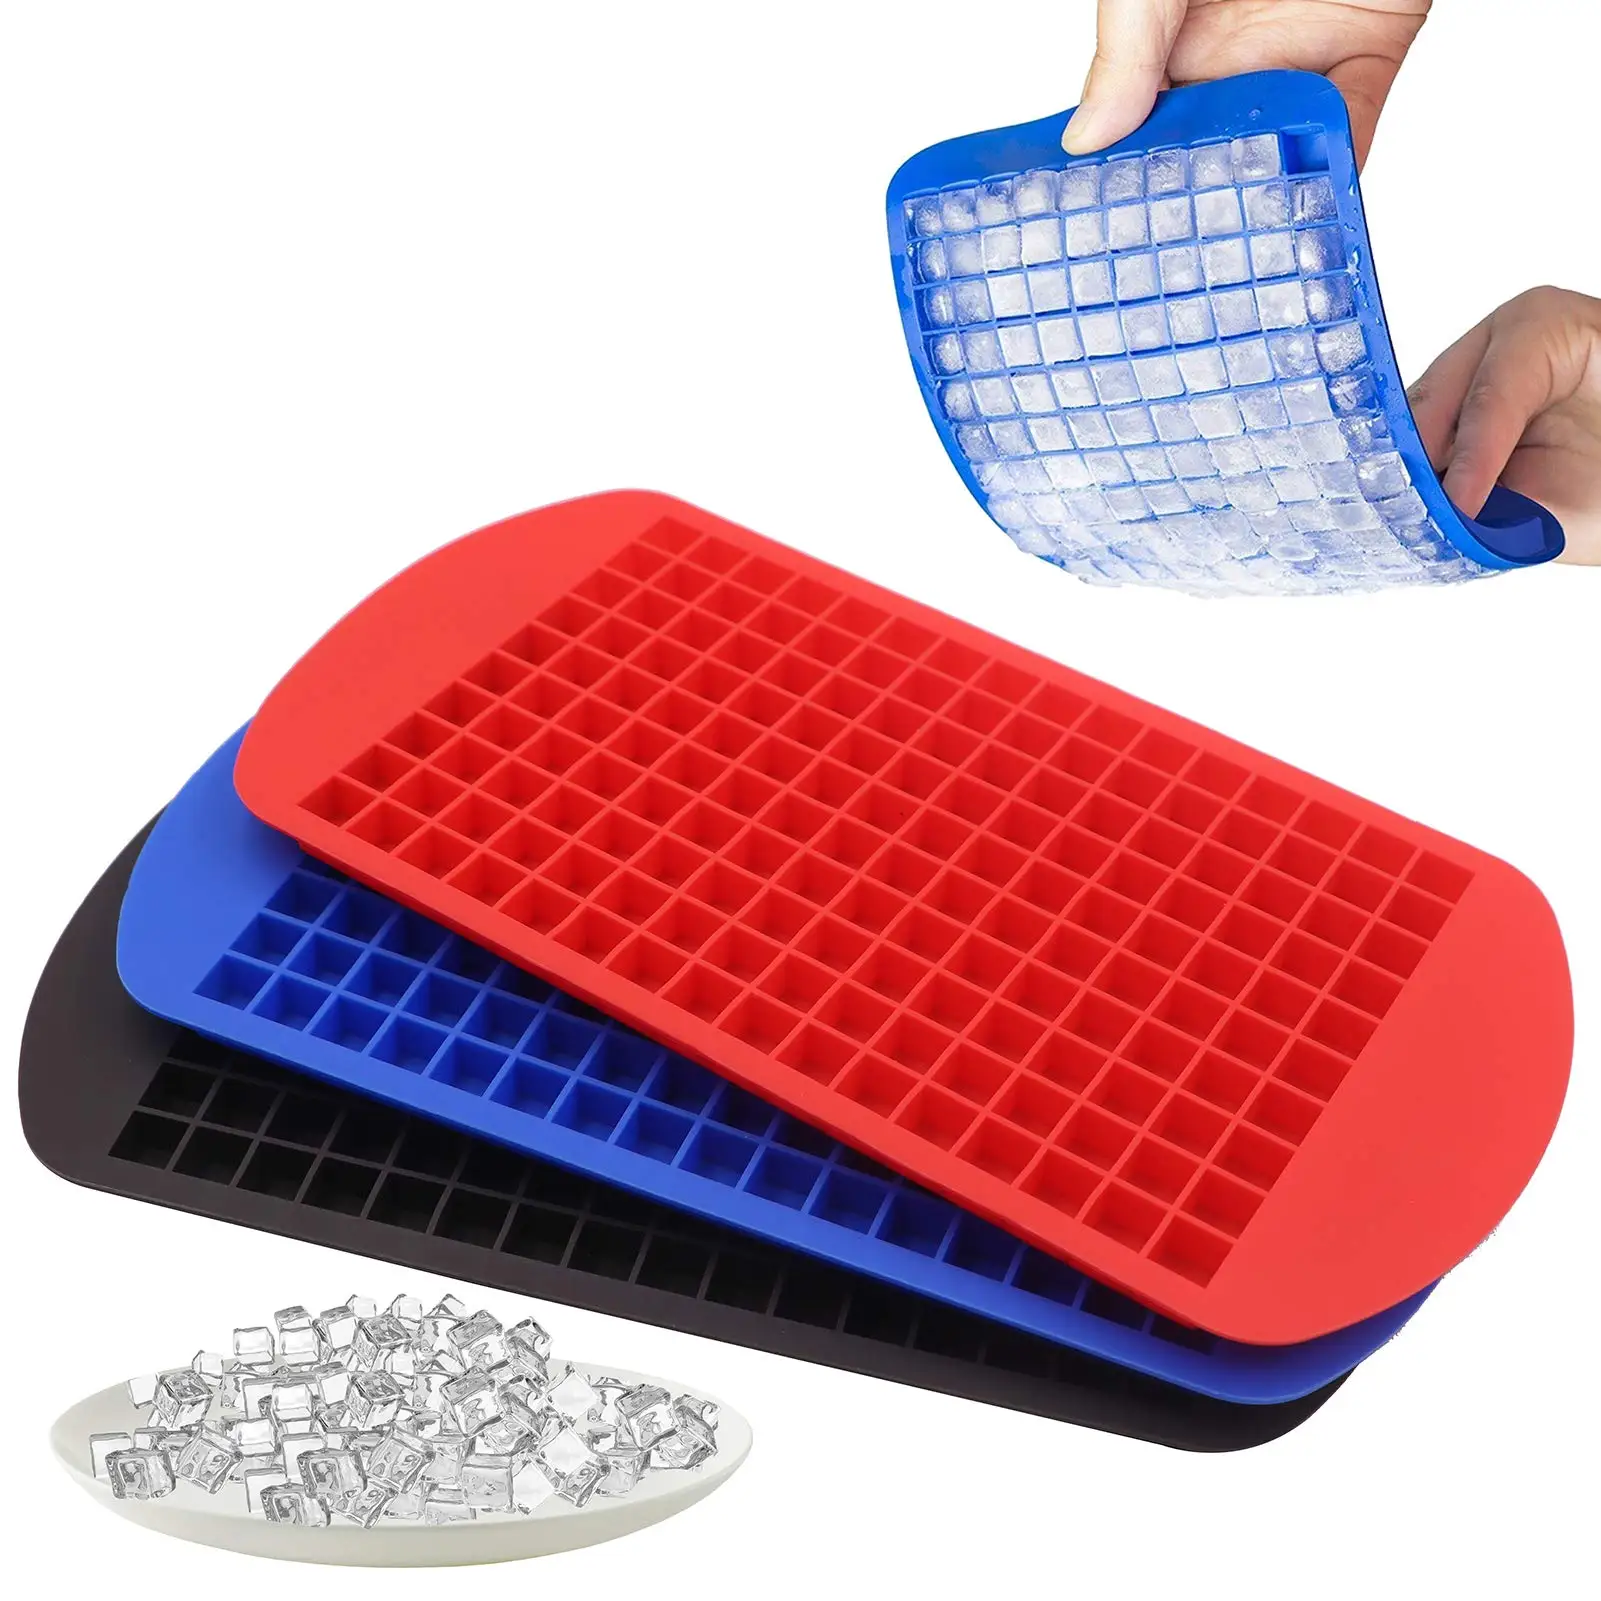 

Mini Ice Cube Trays 2 Ice Tray Set 160 Small Cube Silicone Molds Bpa-free Mini Cubes Will Chill Your Drink Faster, According to pantone color